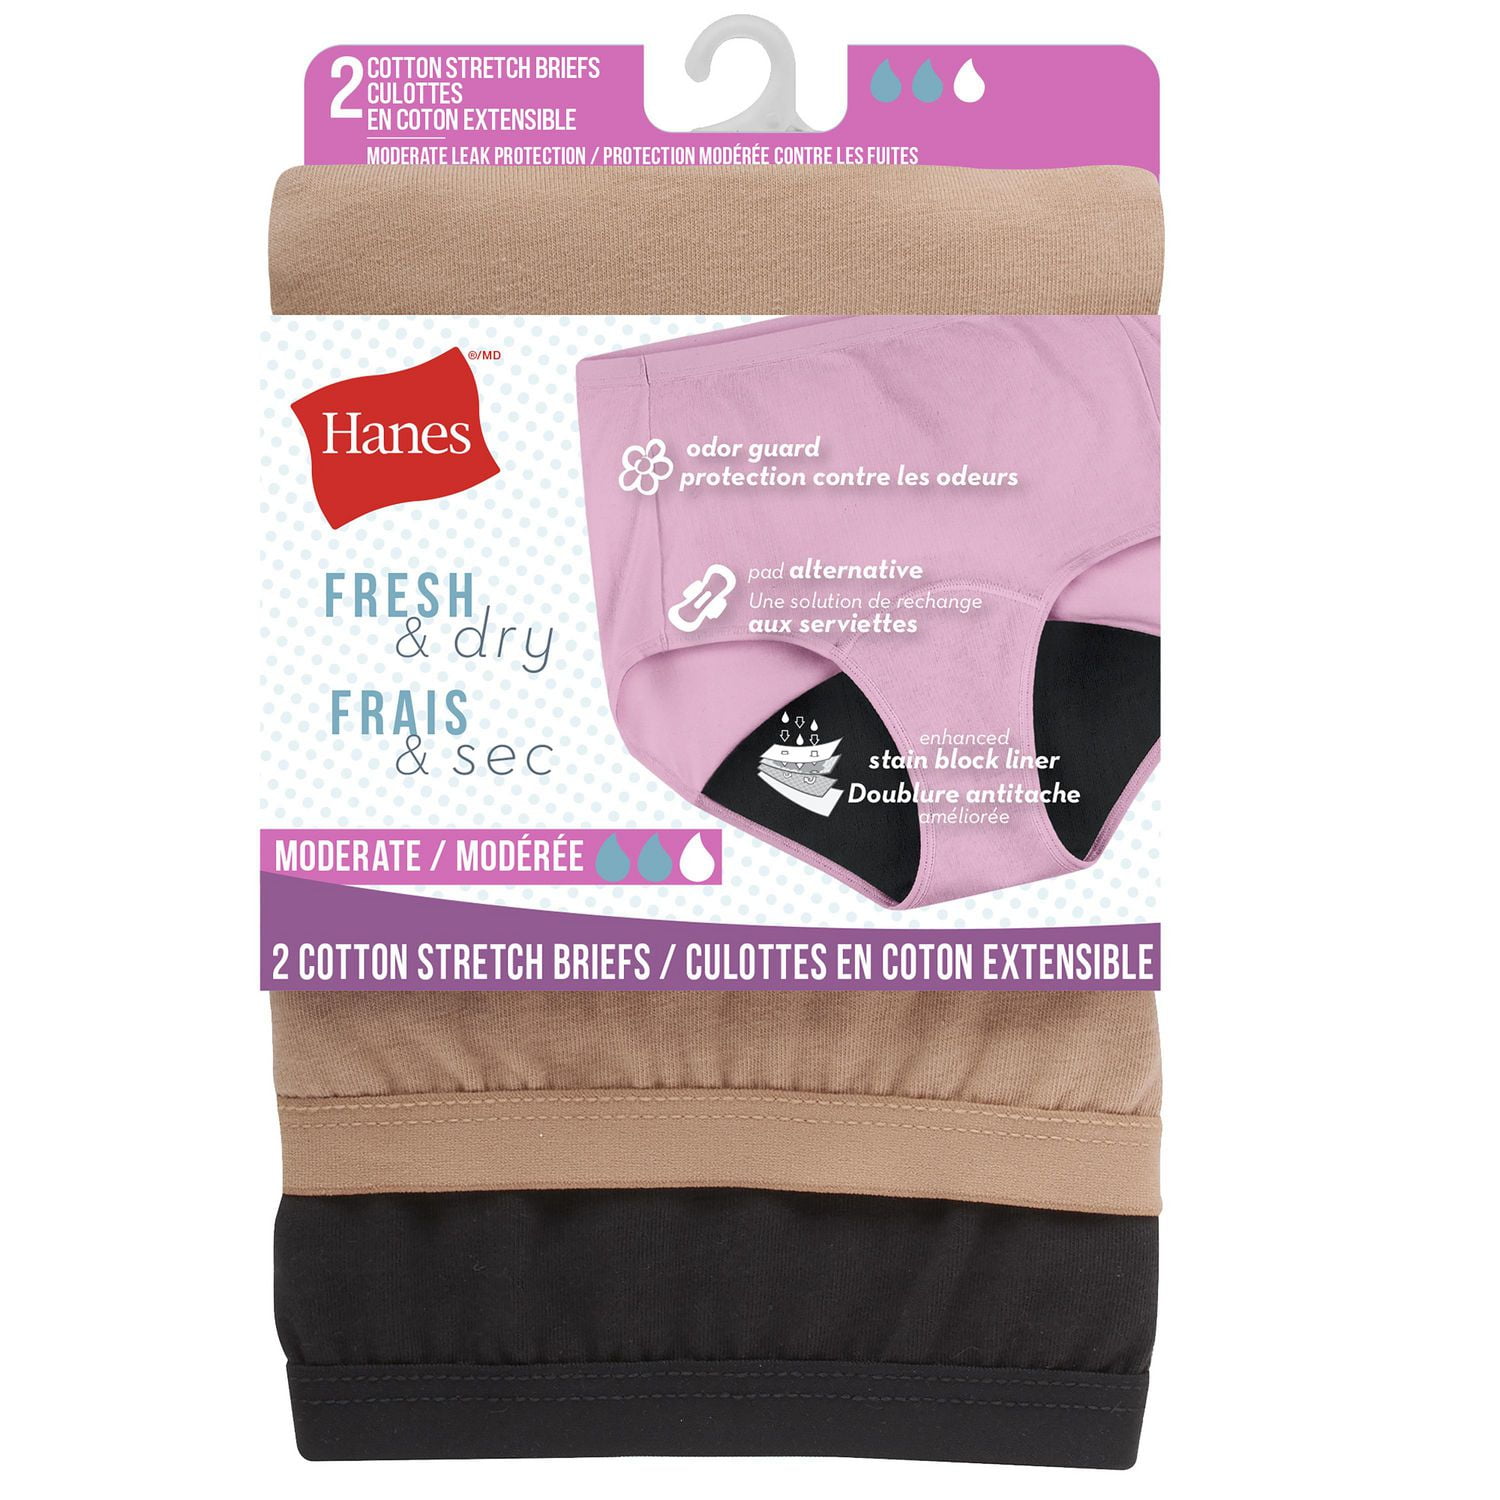 Hanes: Enjoy peace of mind with new Hanes Fresh & Dry panties